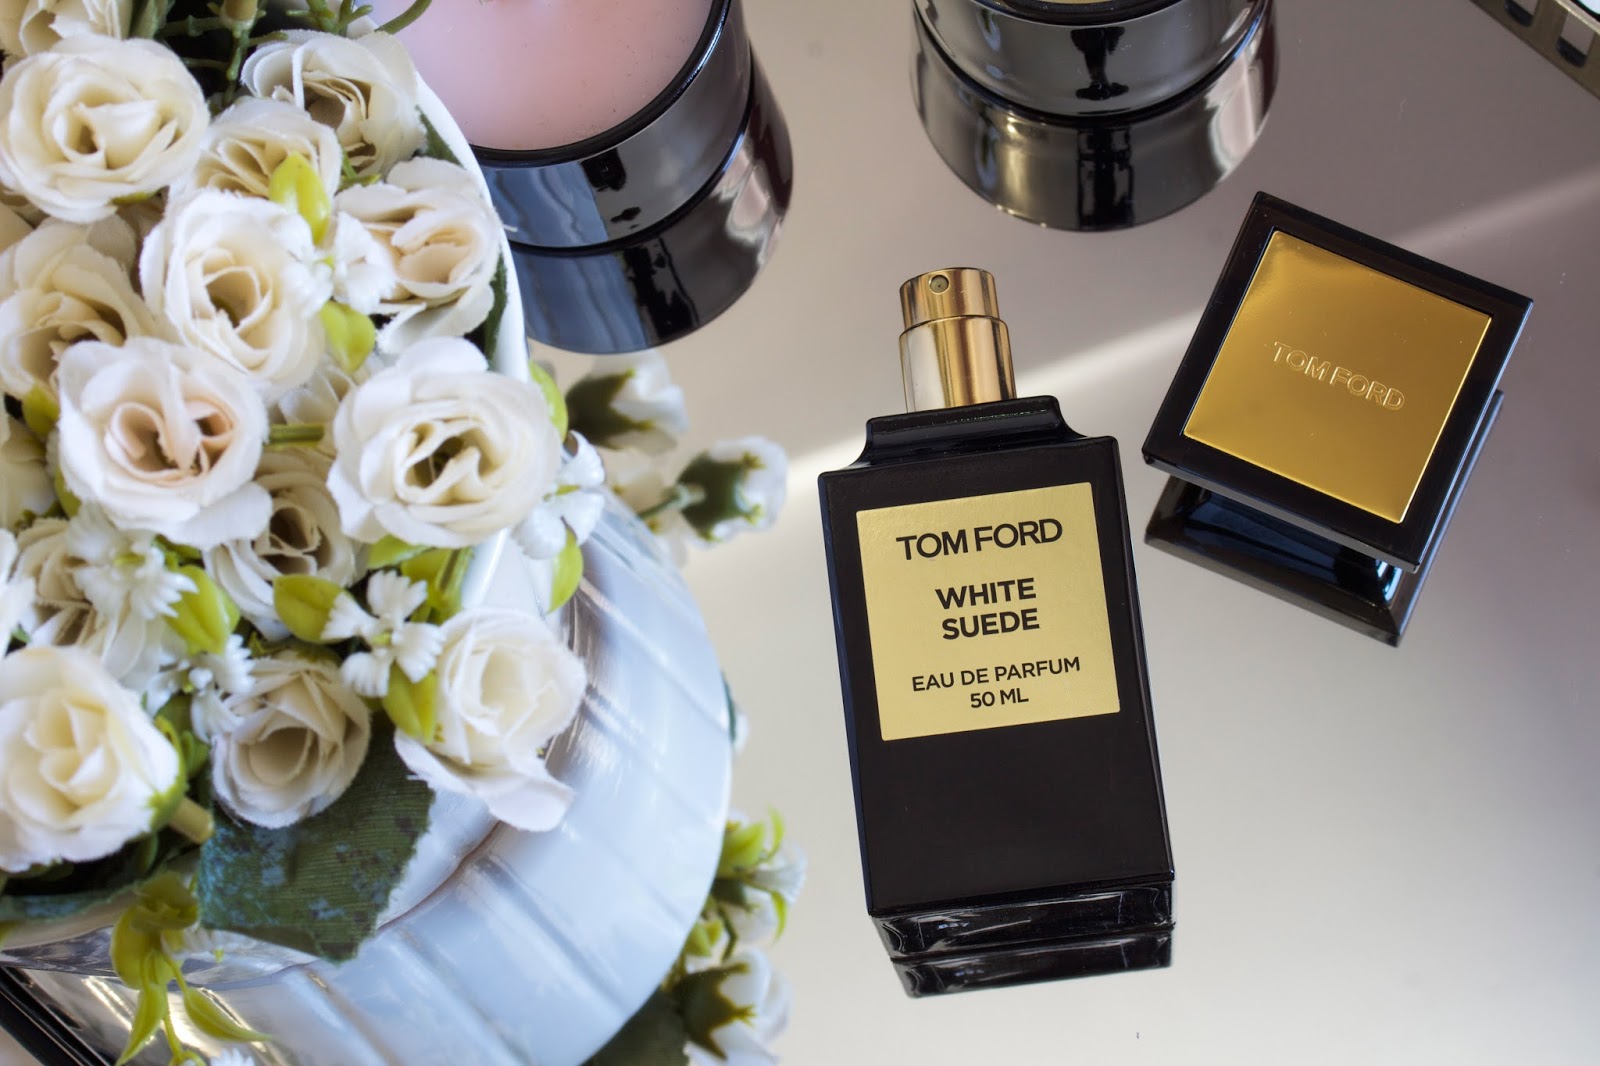 Tom Ford White Suede edp